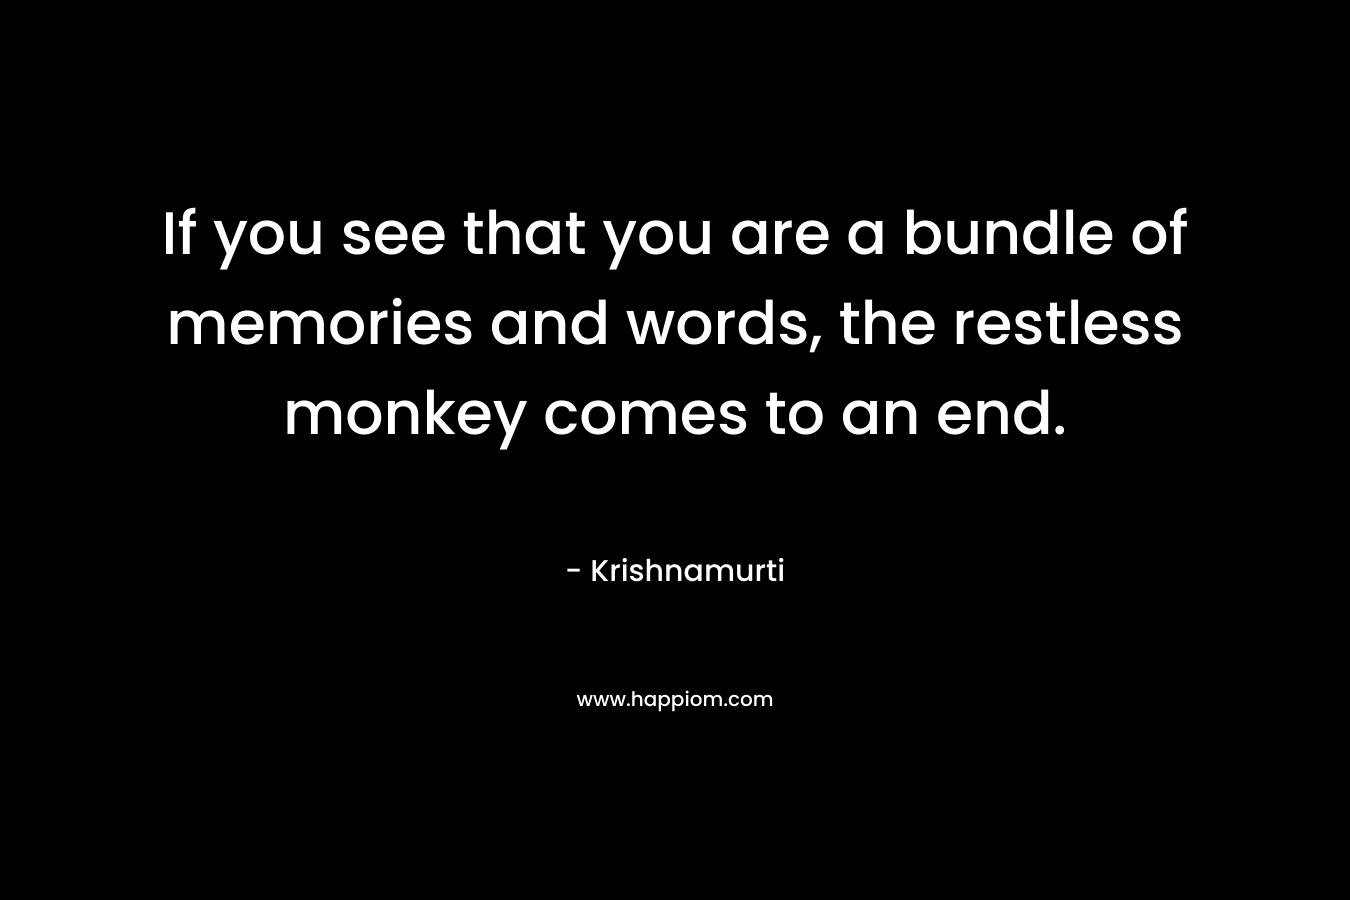 If you see that you are a bundle of memories and words, the restless monkey comes to an end. – Krishnamurti